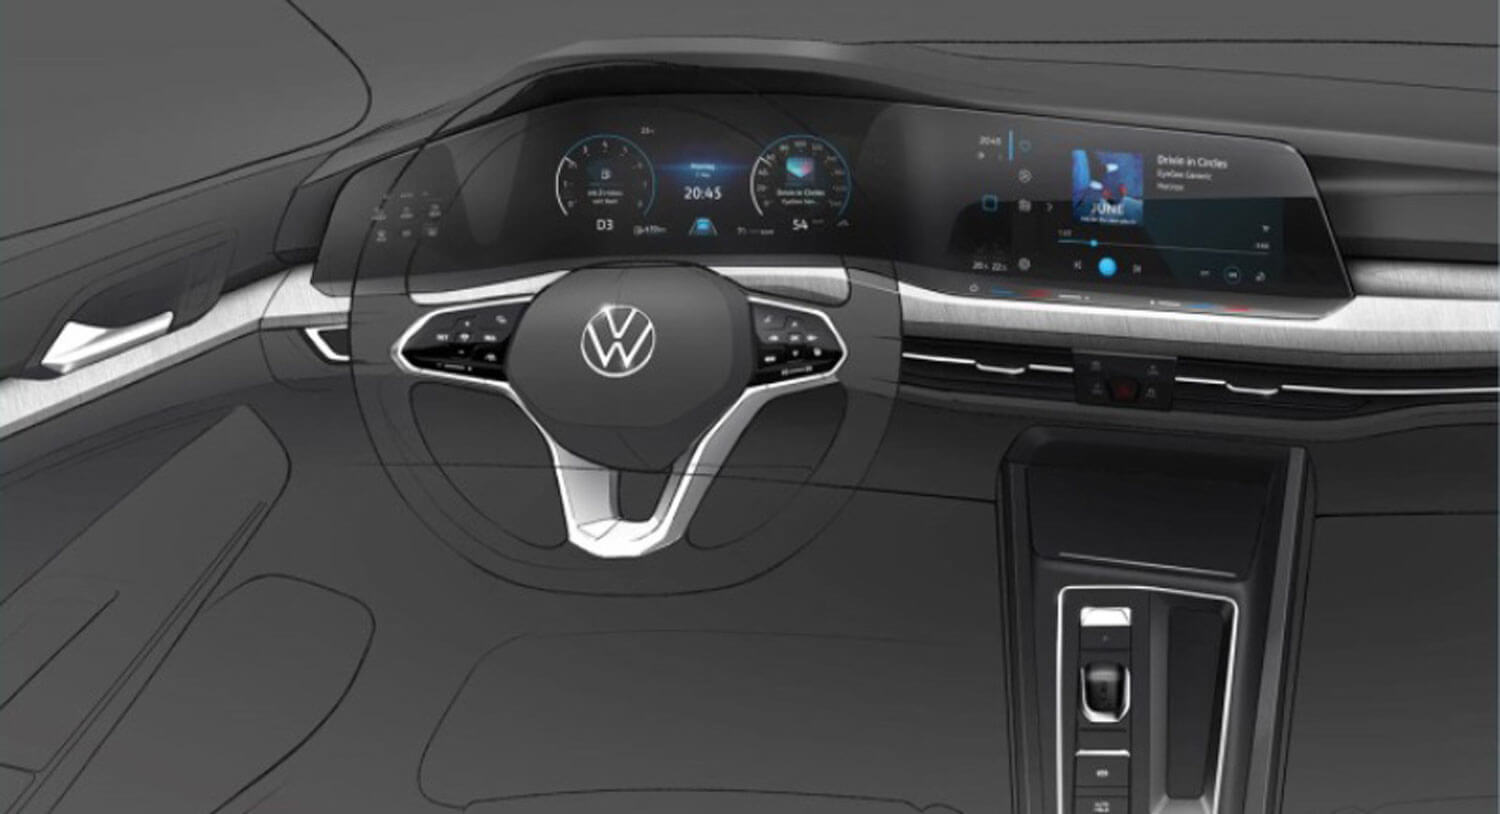 2020 VW Golf 8 Interior and Exterior Sketches Are Very Revealing